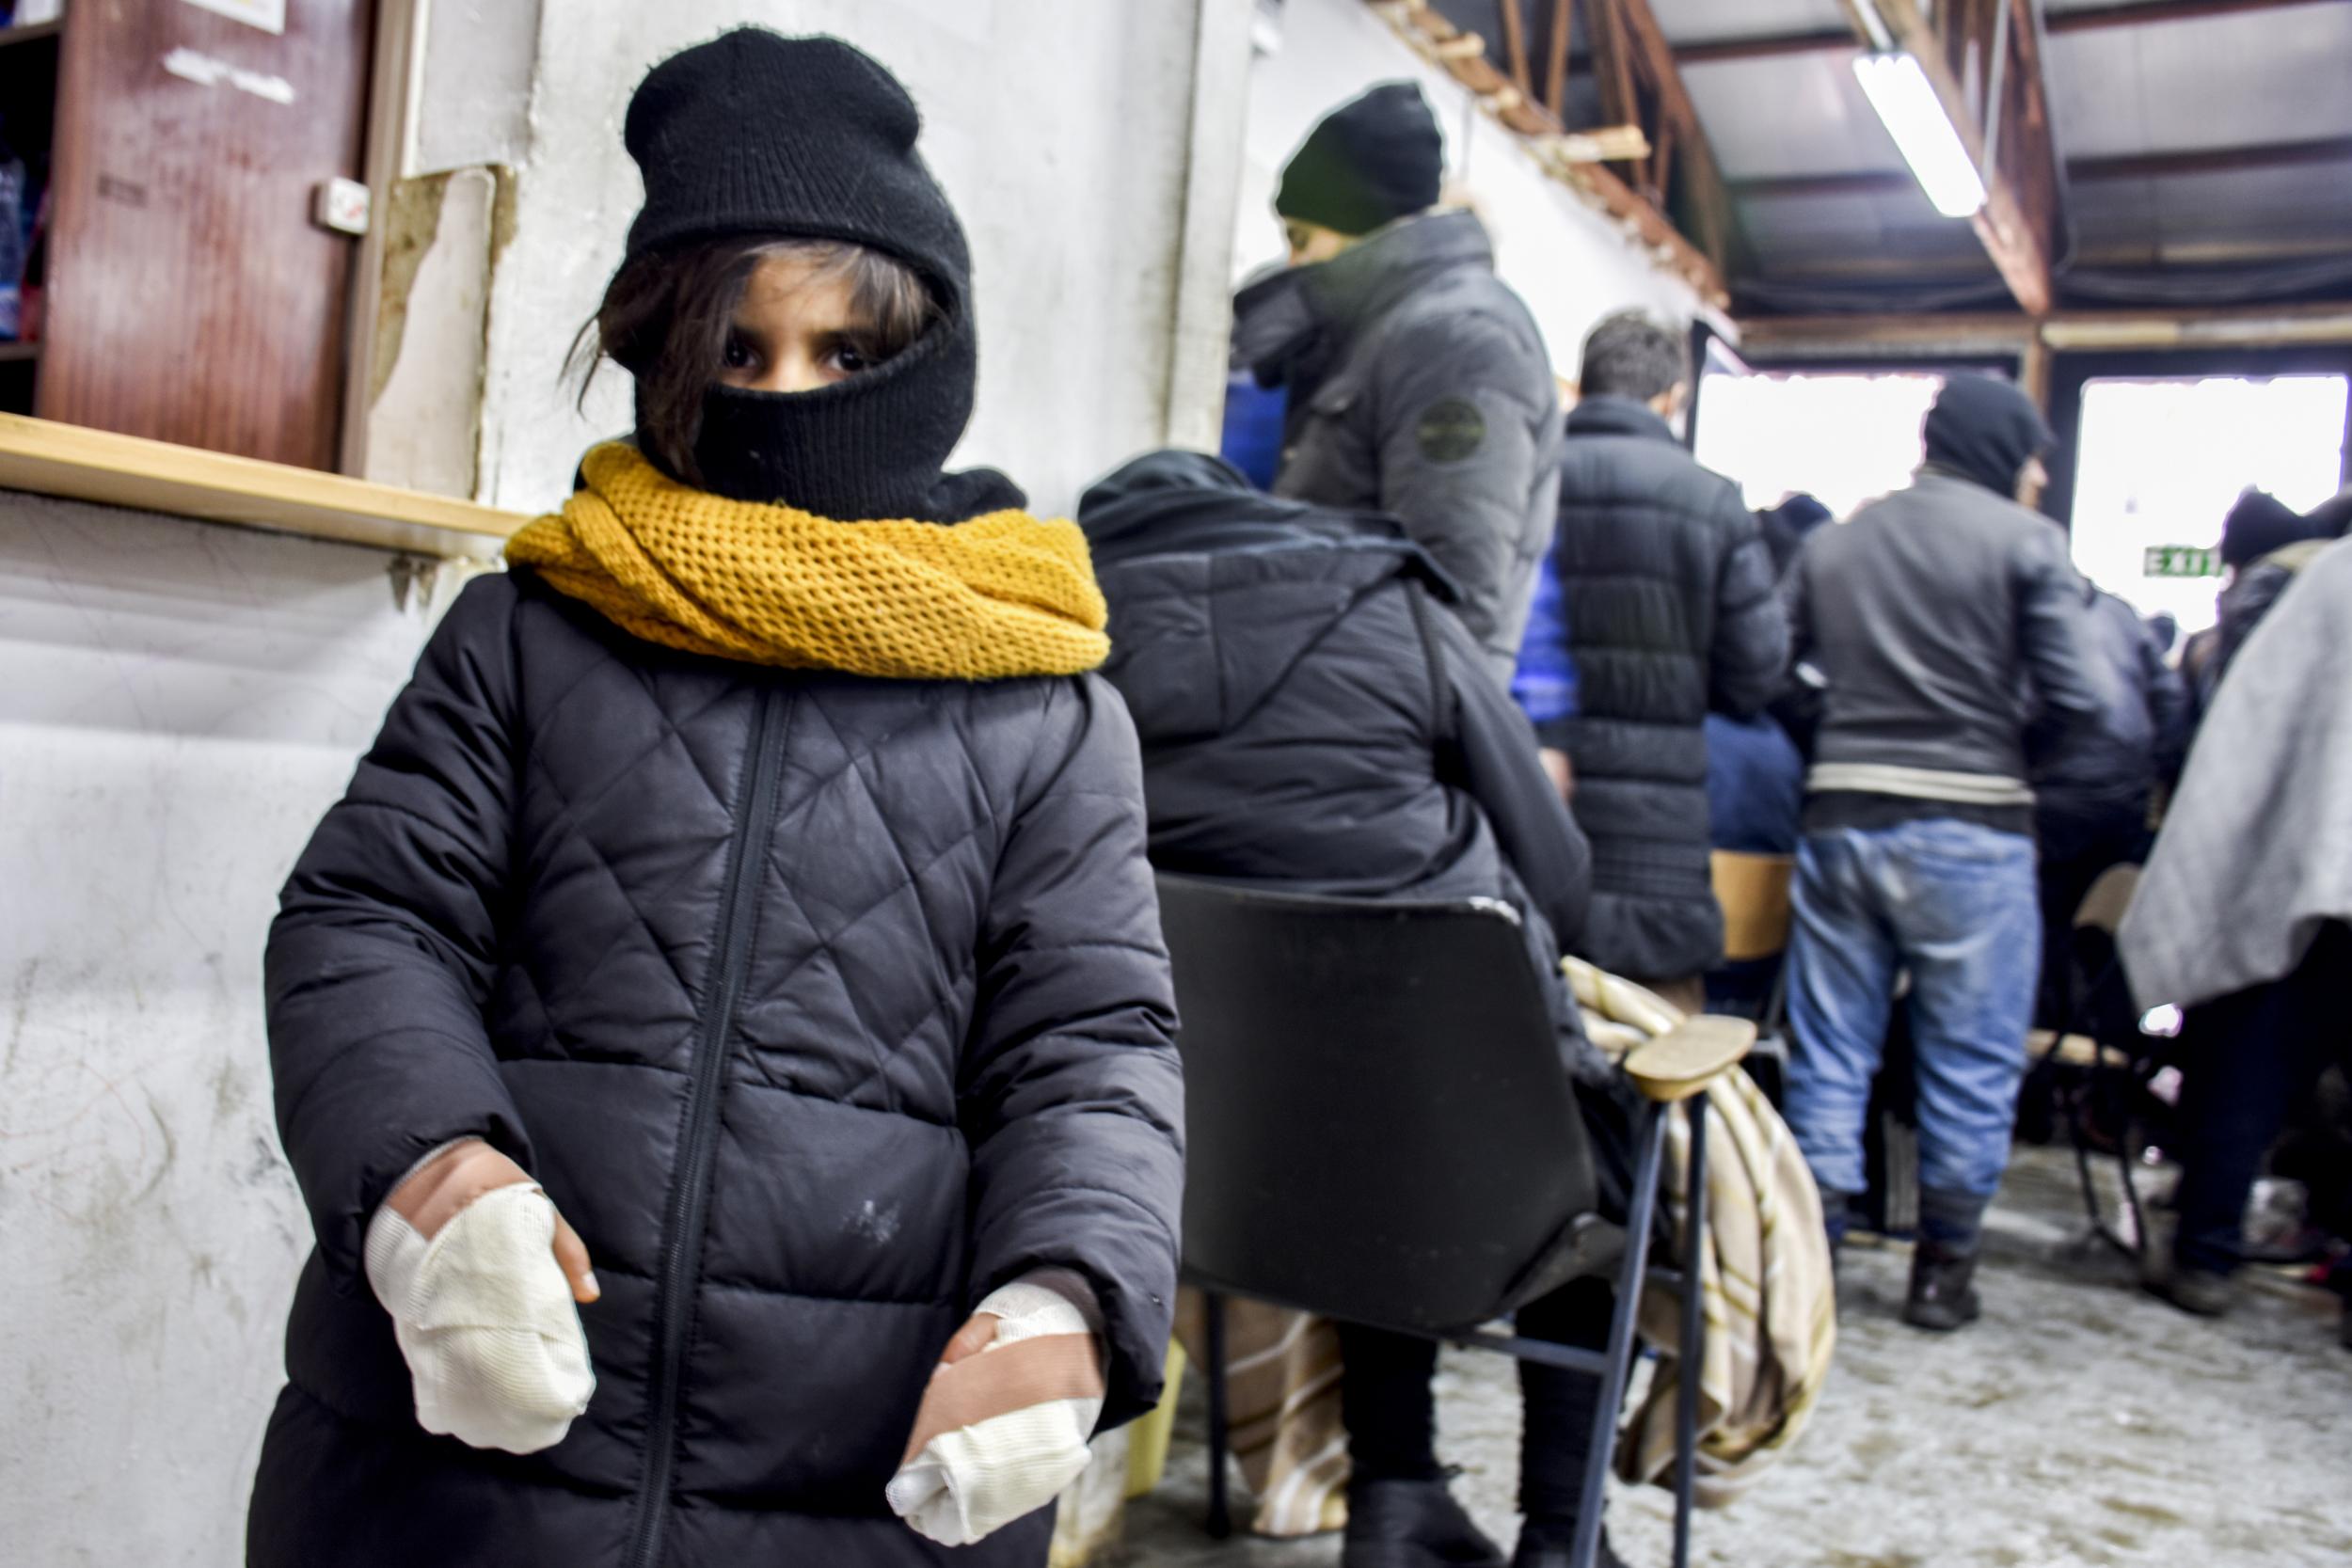 A young girl is pictured in freezing Belgrade after travelling for days with her family in temperatures as low as -10C